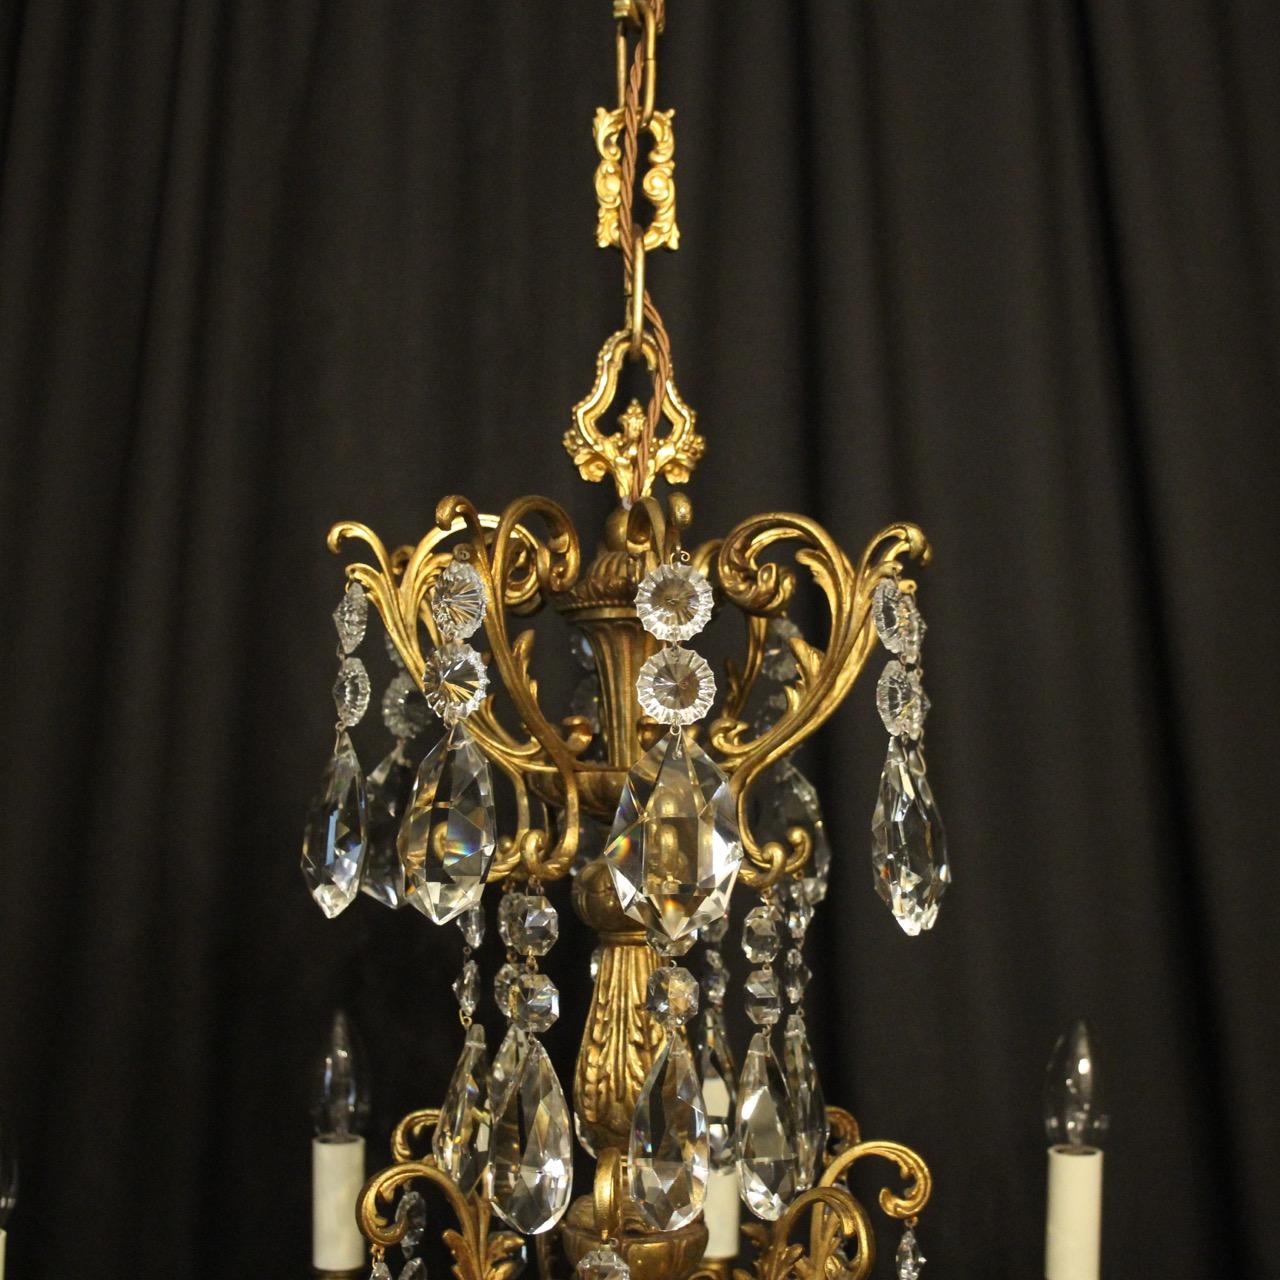 French Gilded Bronze and Crystal 19th Century Antique Chandelier For Sale 4